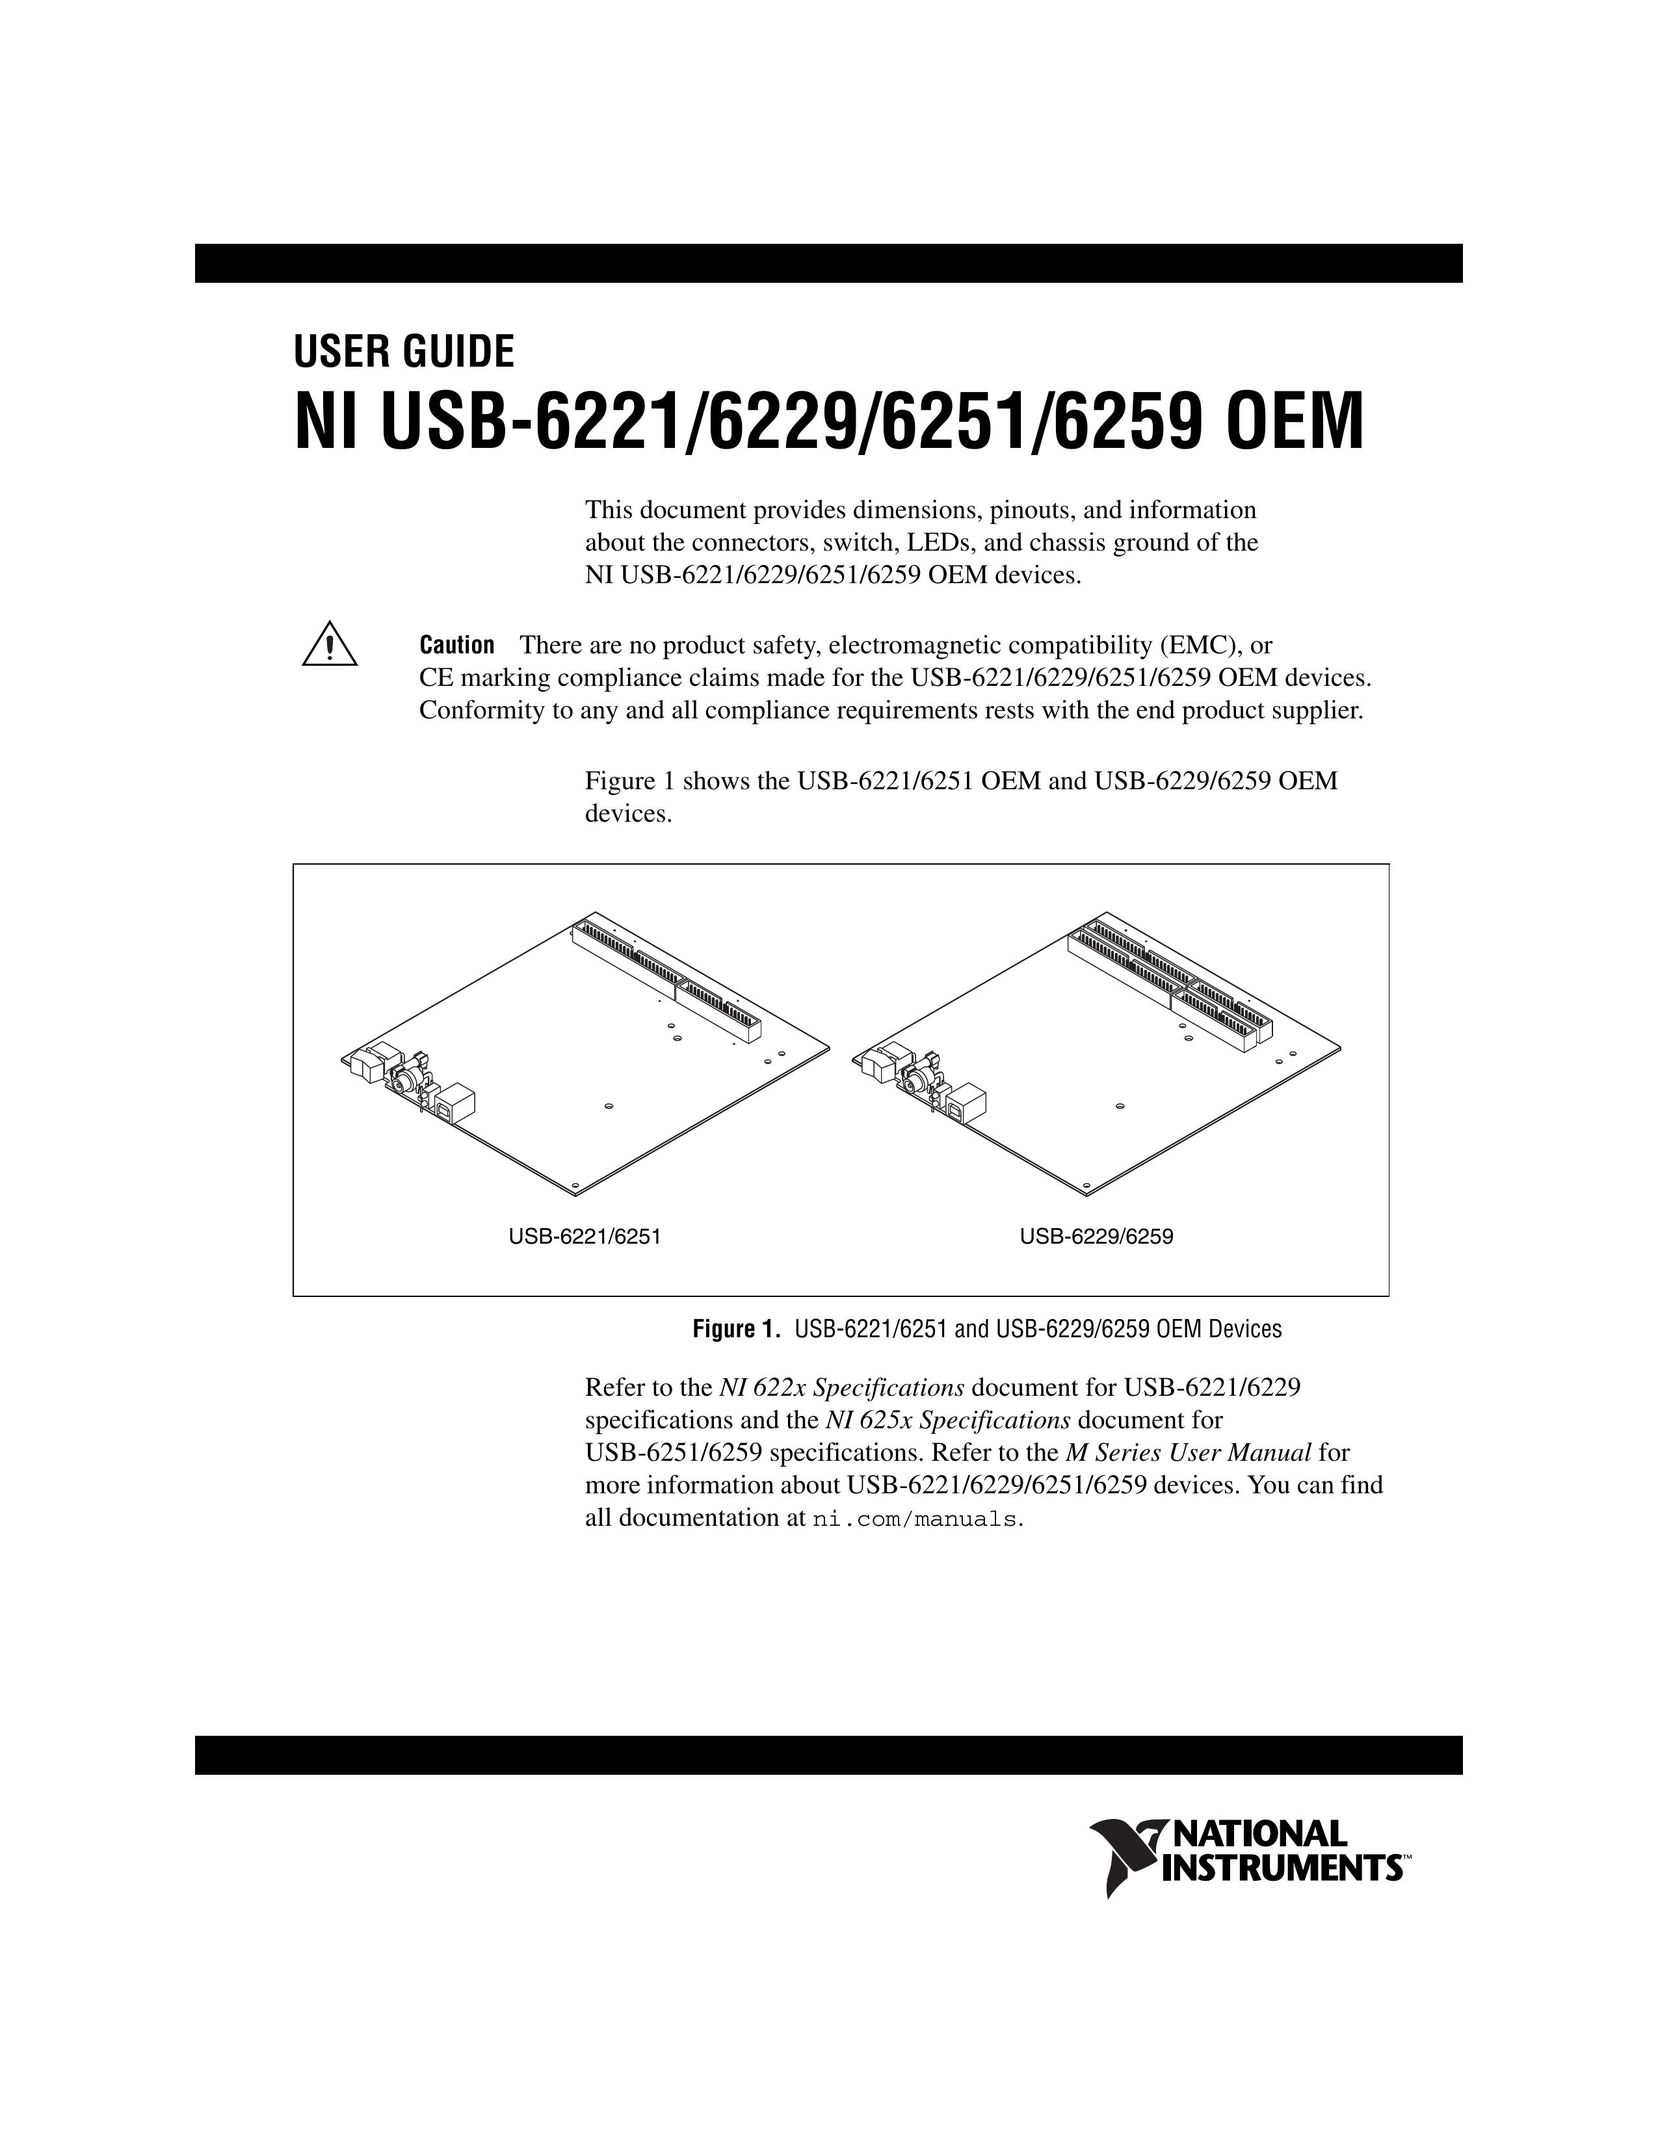 National Instruments NI USB-6251 Switch User Manual